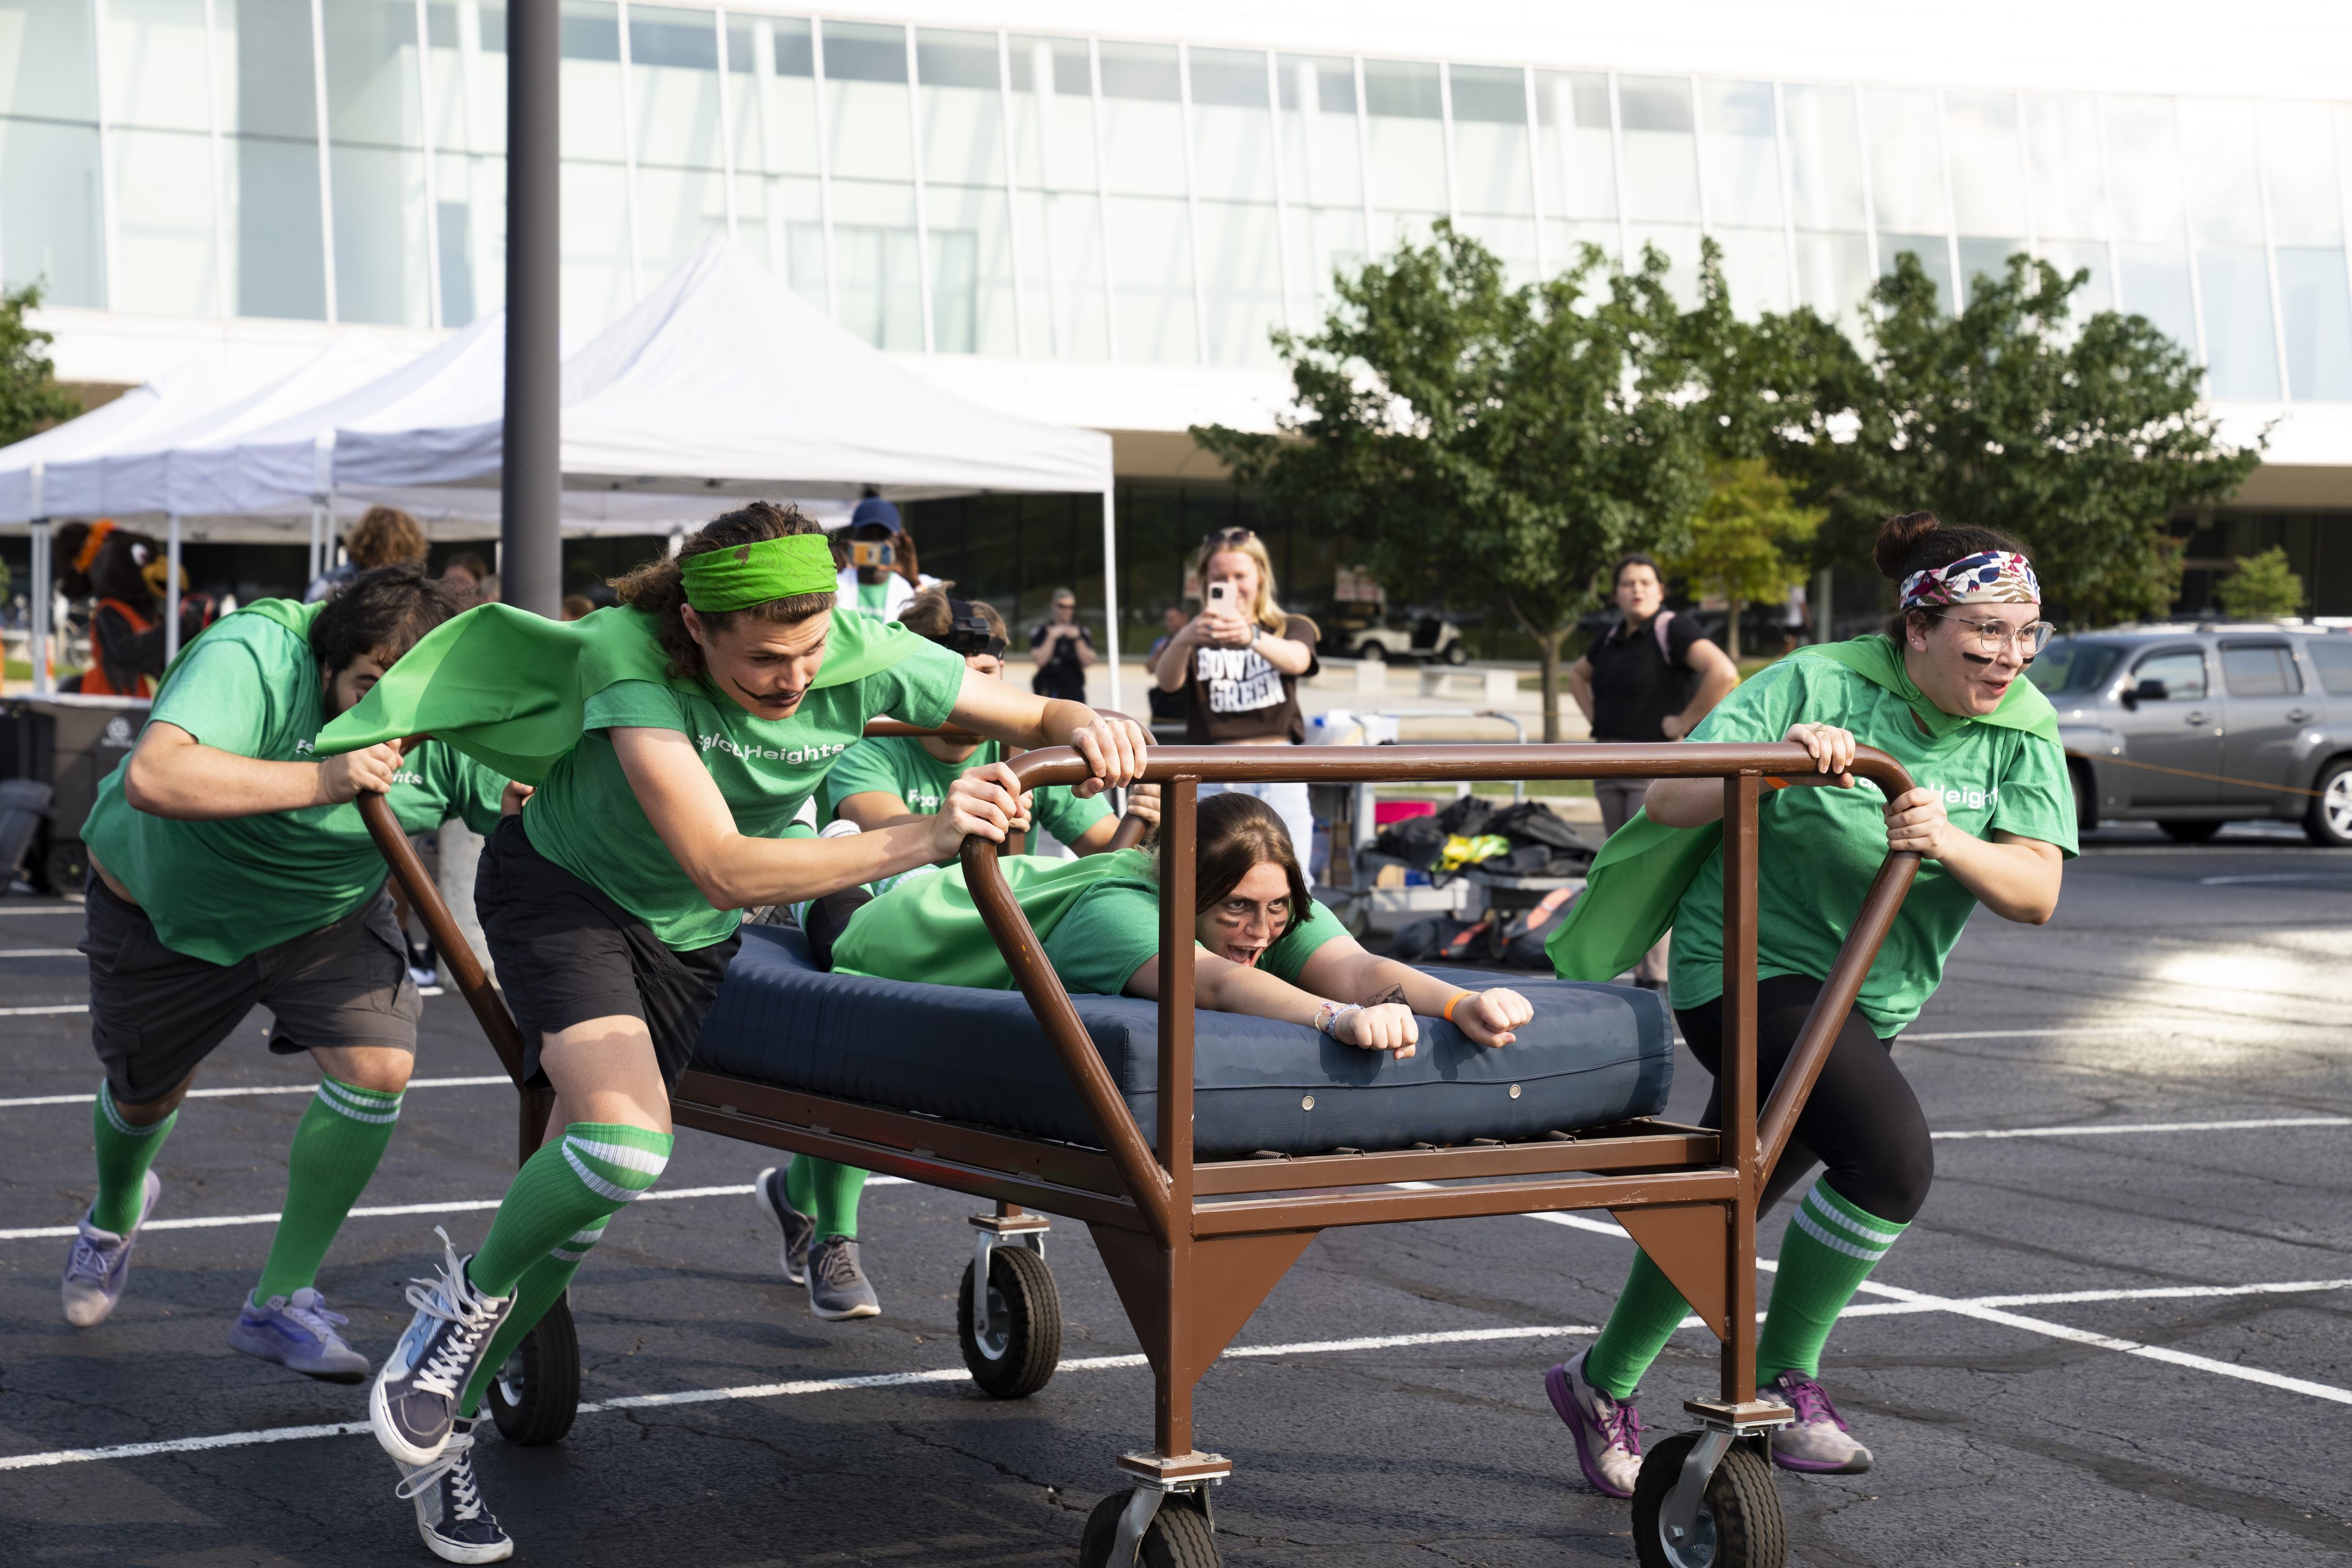 Students push a wheeled bed during a race